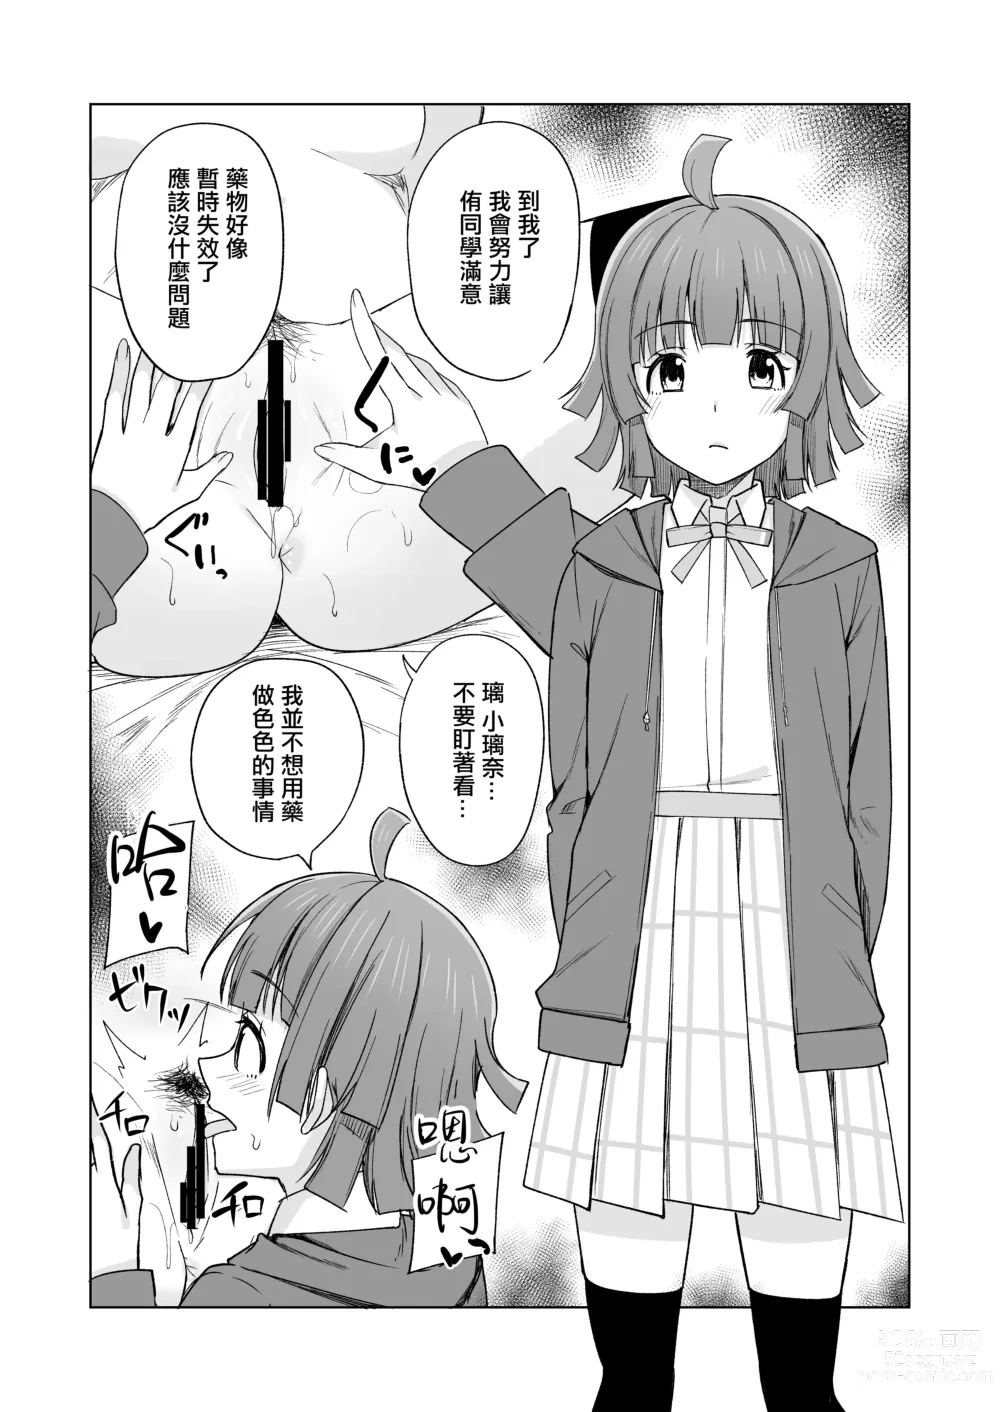 Page 9 of doujinshi 誕生的悸動